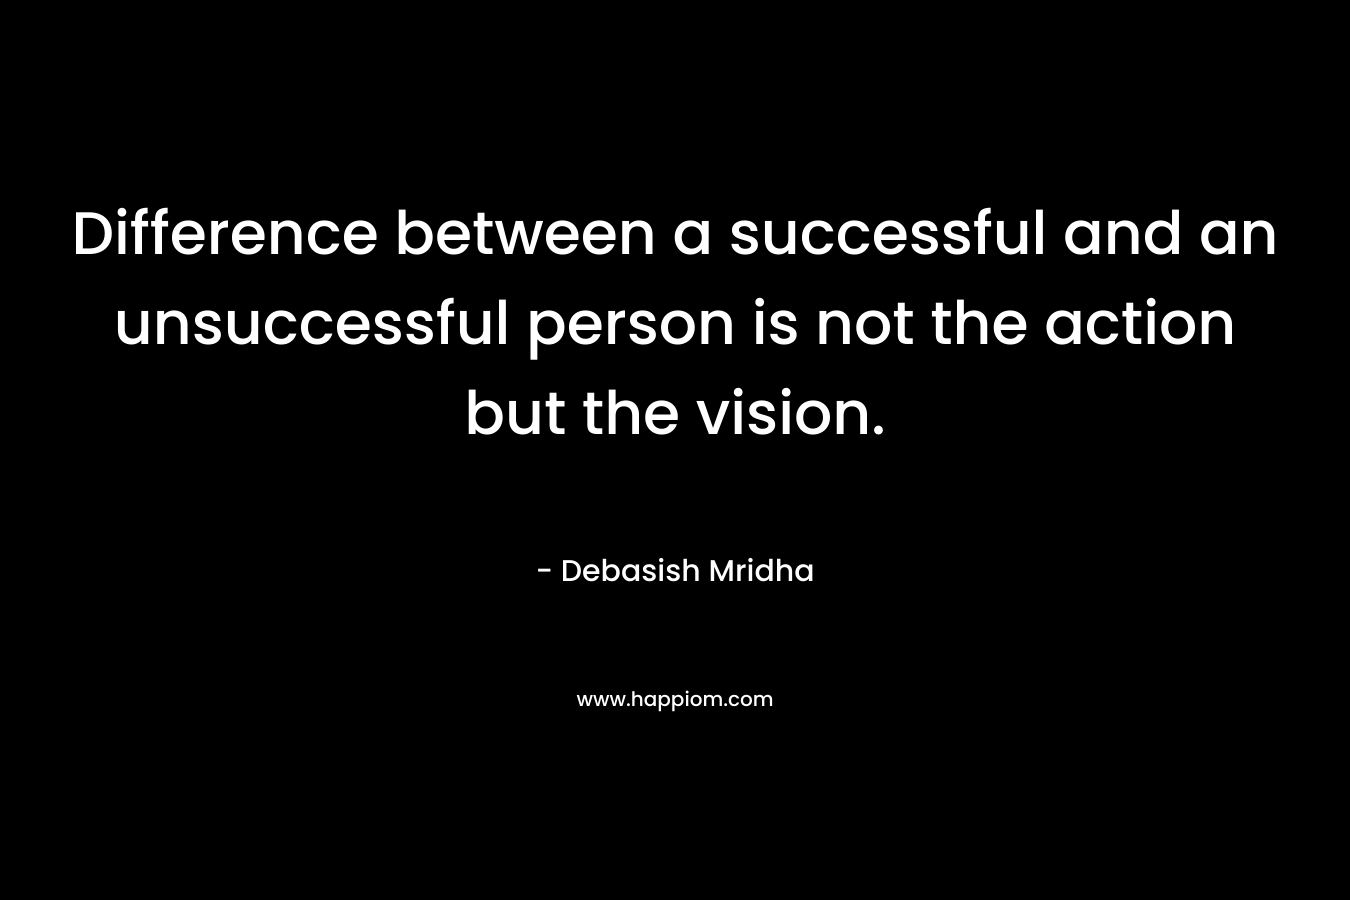 Difference between a successful and an unsuccessful person is not the action but the vision.